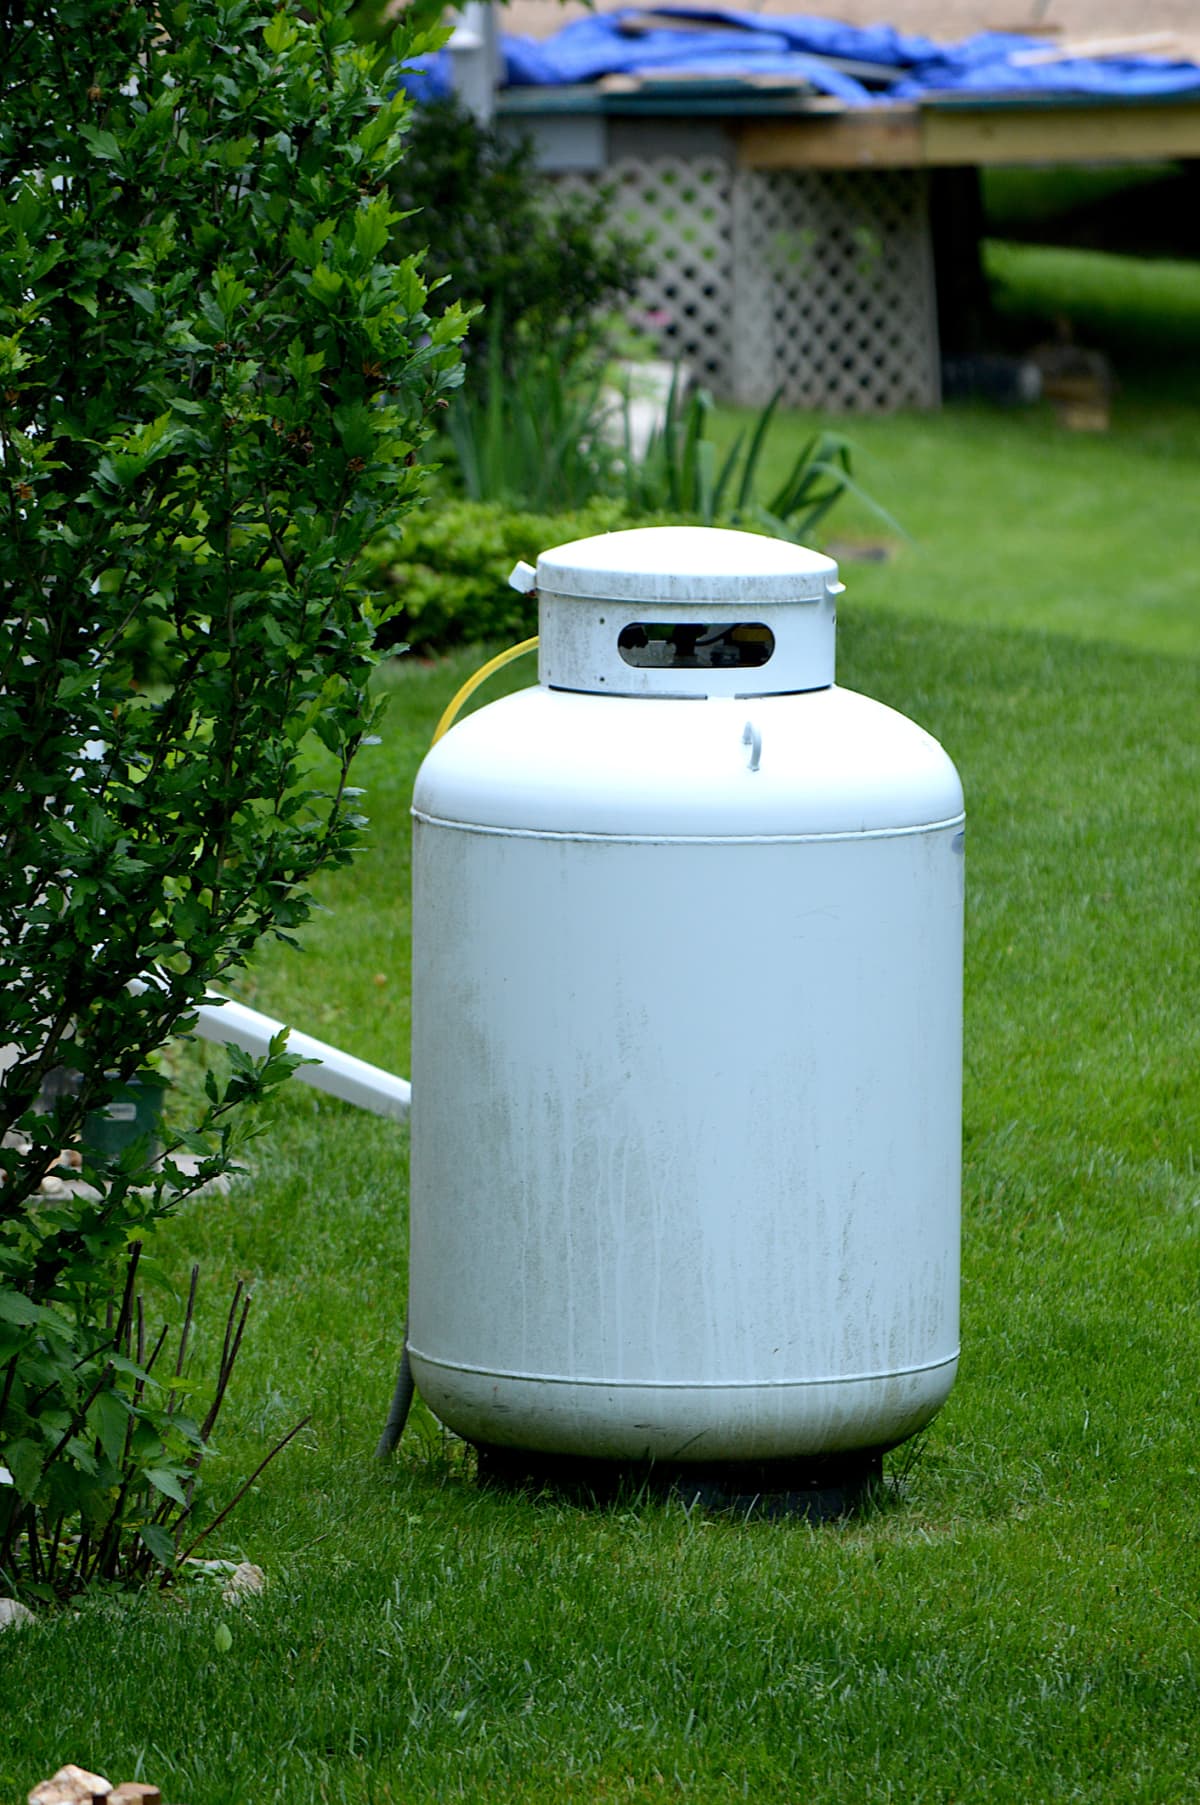 A propane tank placed on a lawn